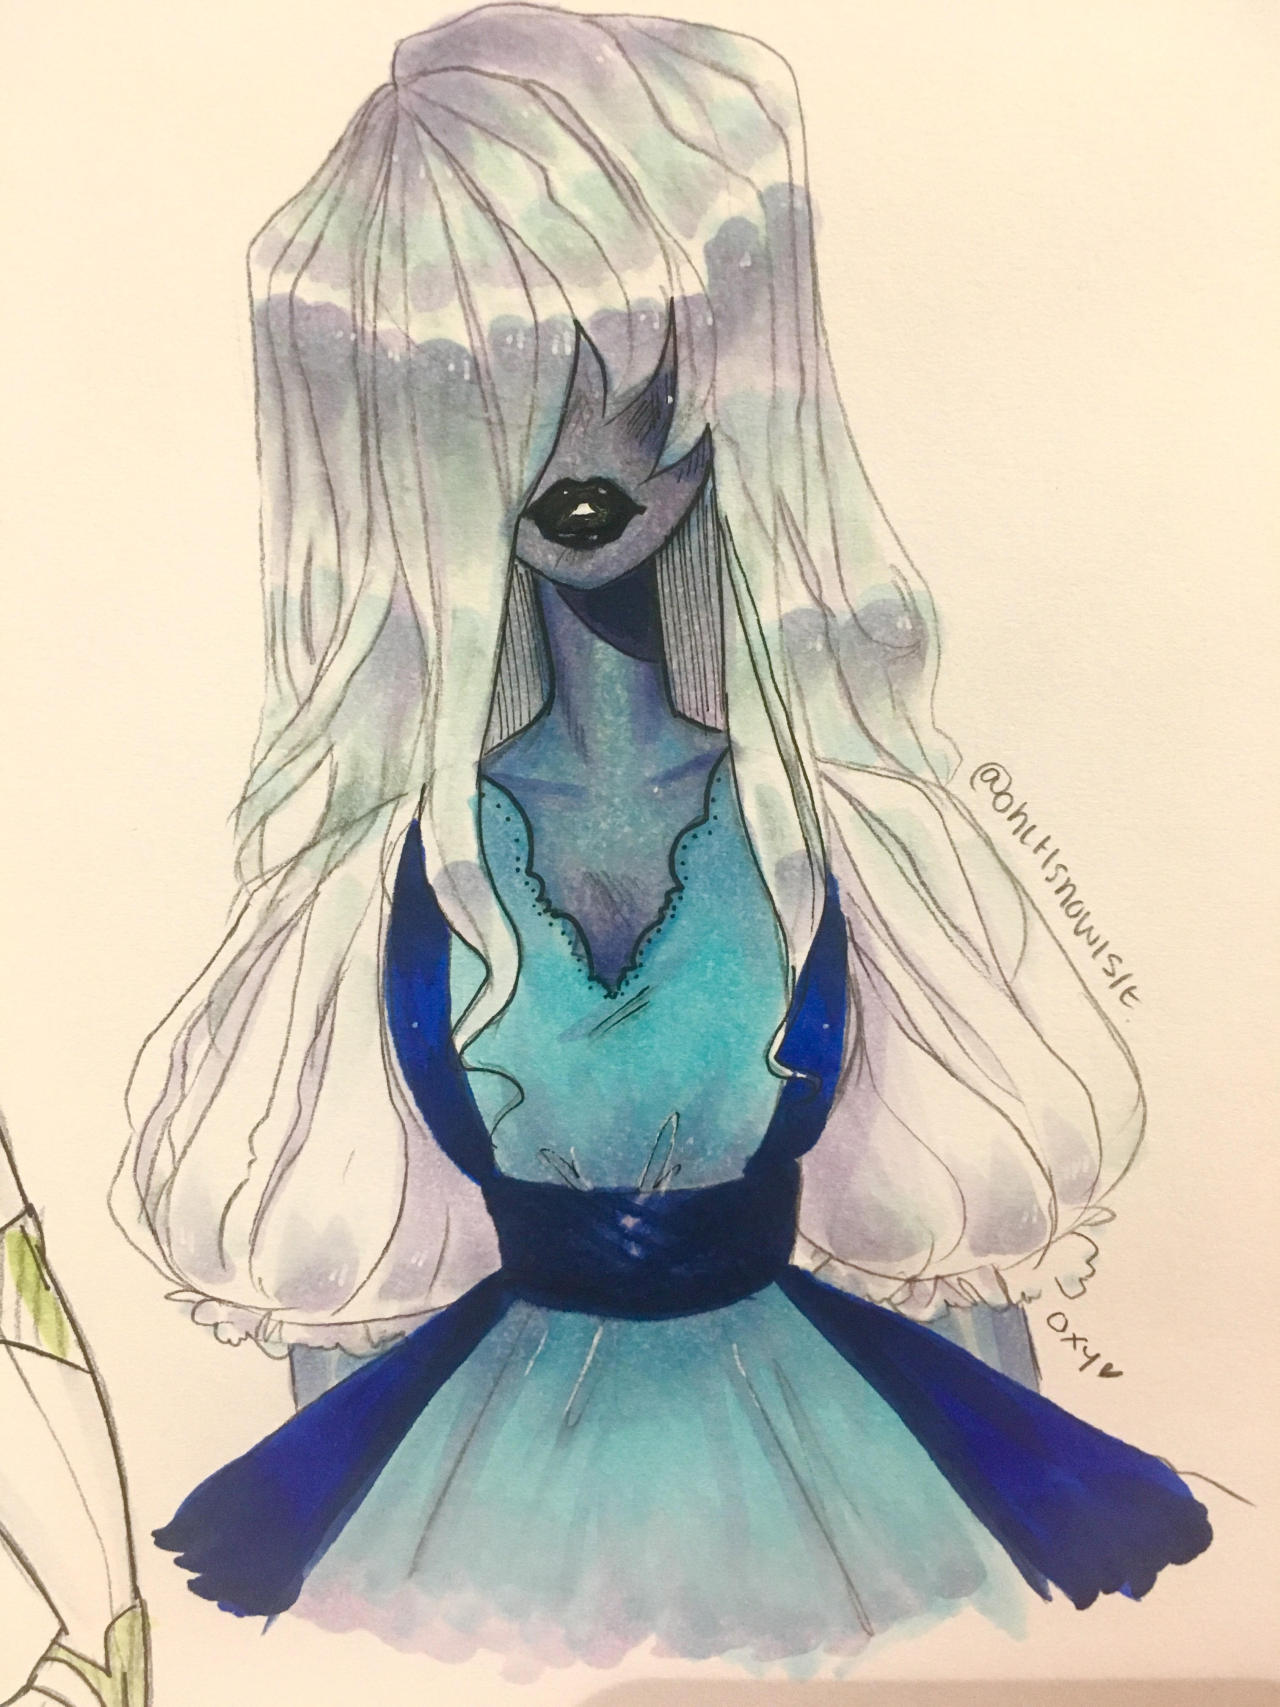 Anonymous said: Sapphire from Steven Universe? Answer: Sapphire! I’m so glad someone suggested my favourite gem :D